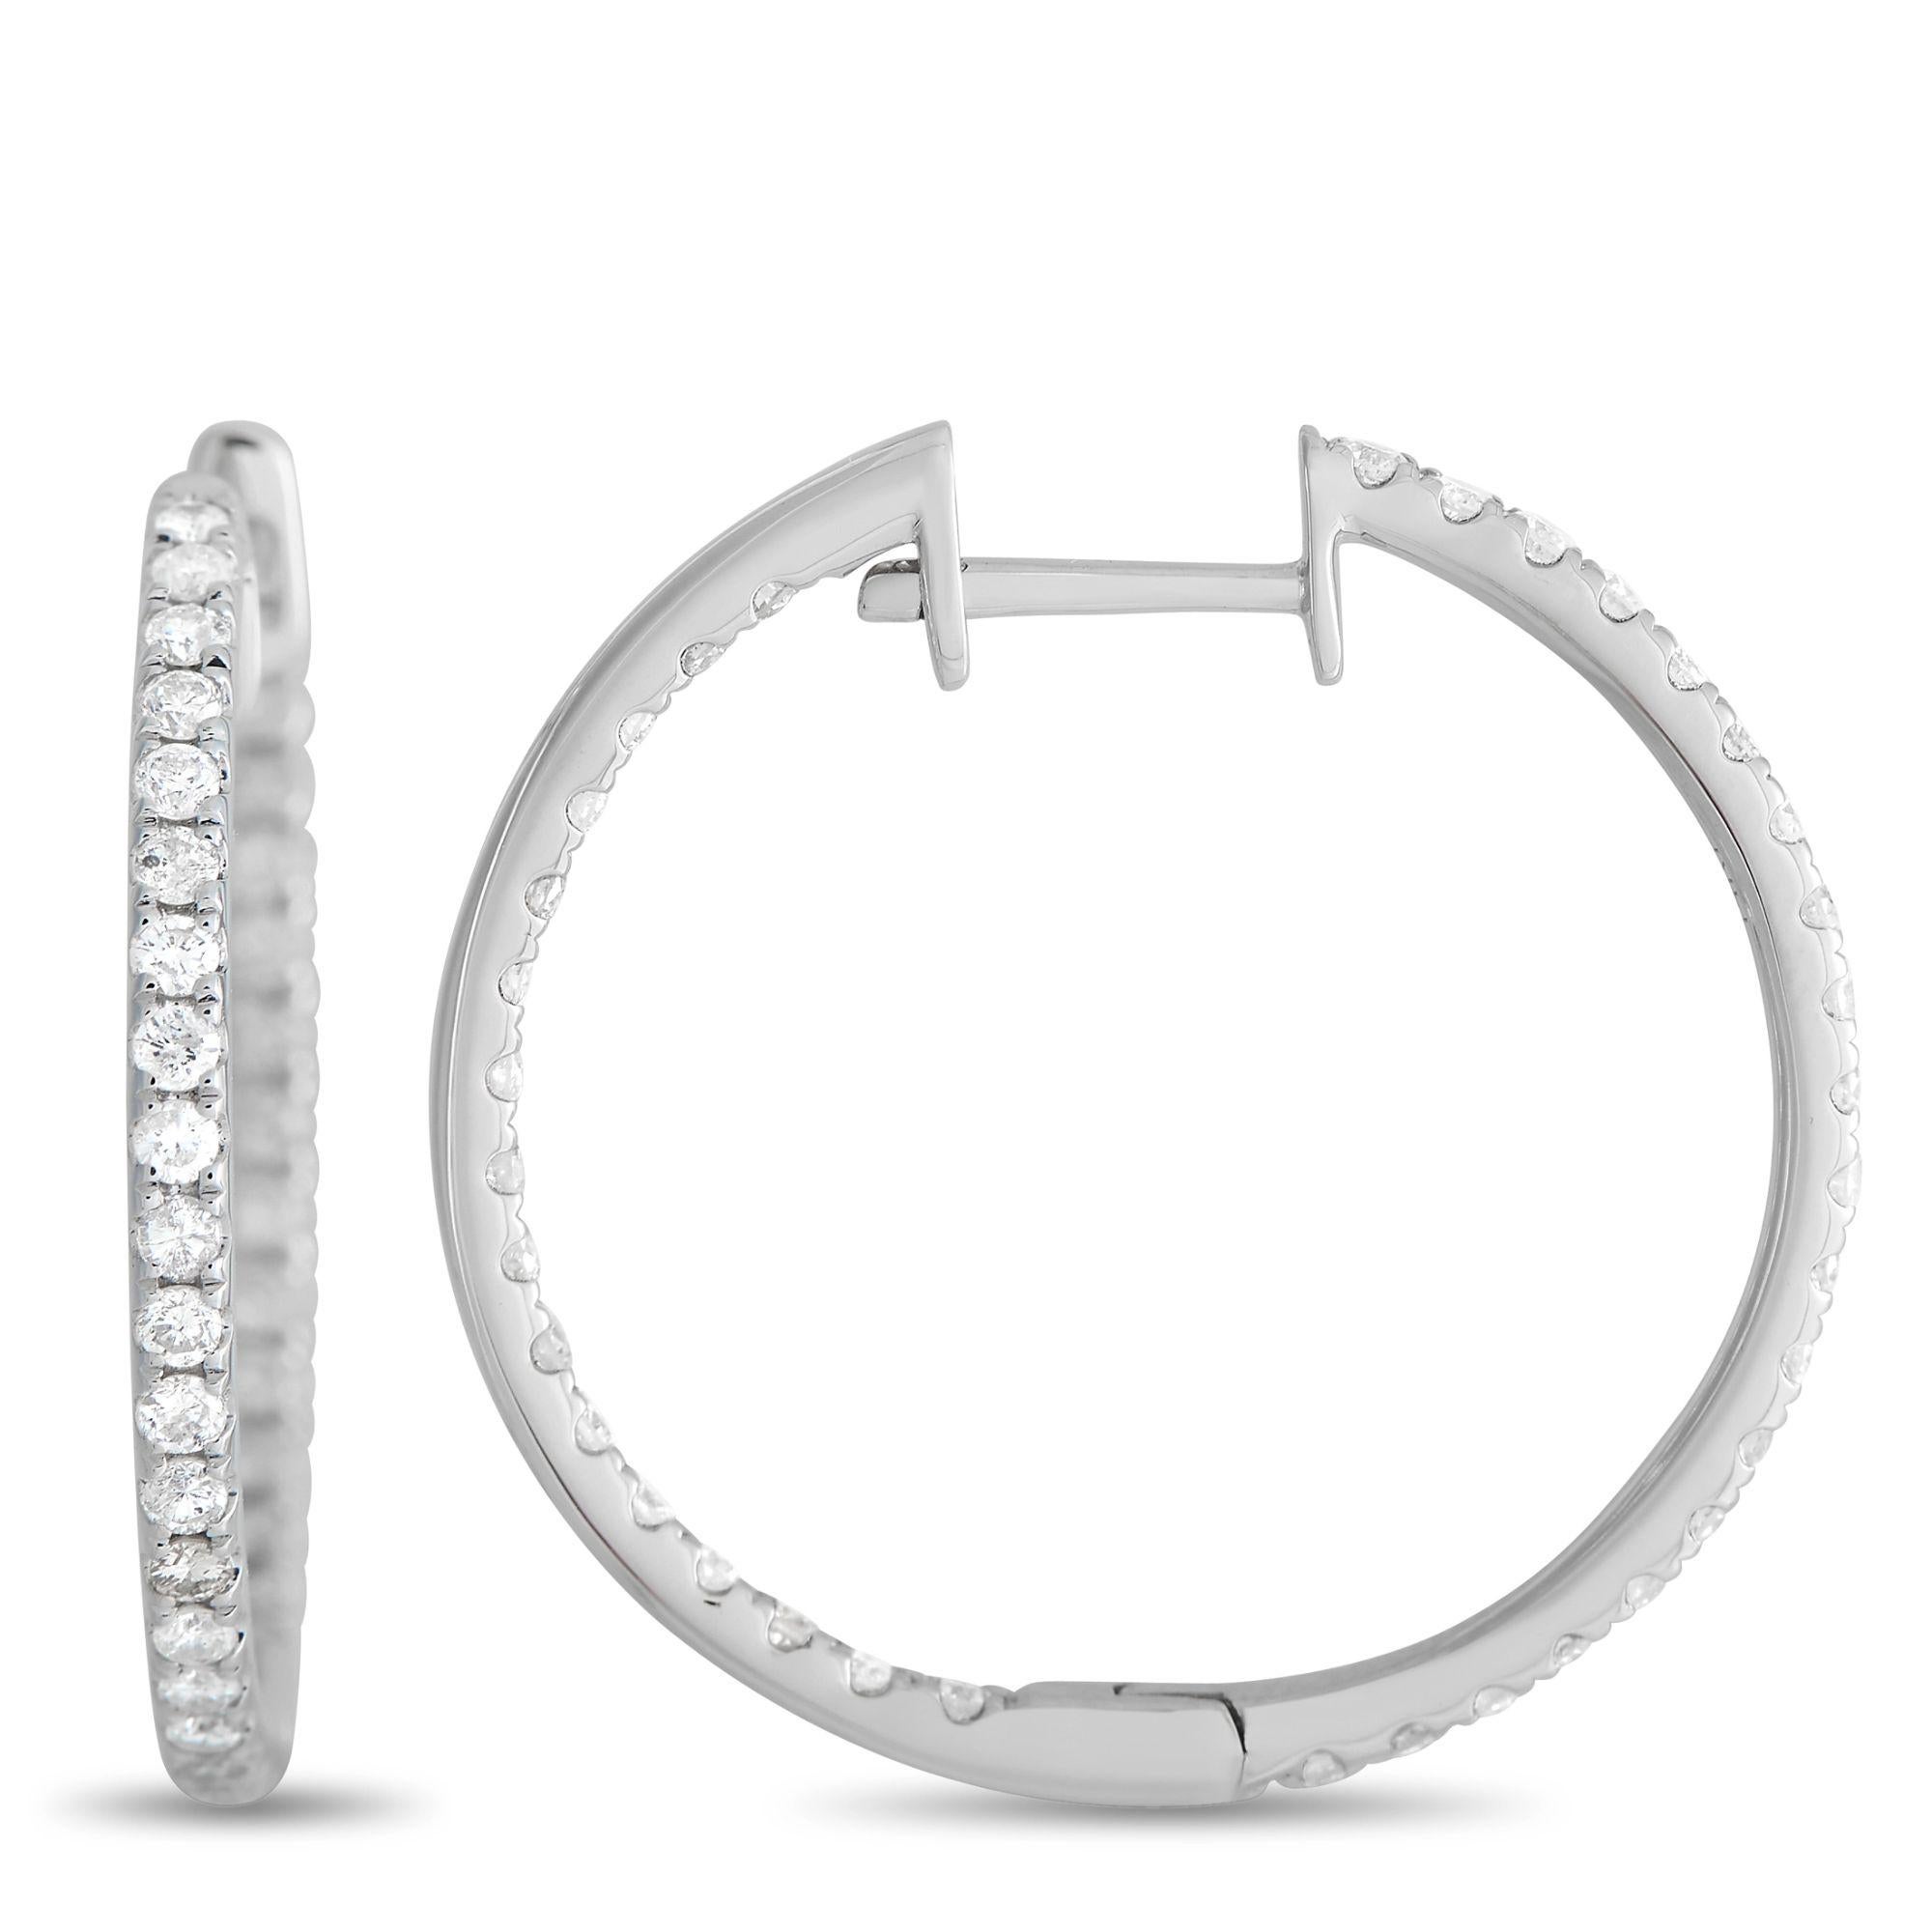 A must-have in every lady's jewelry box. This is your modern diamond hoop designed with an in-and-out display of sparkle. Each hoop features round diamonds running through its outer front face and inner front face. Versatile and elegant yet fun,